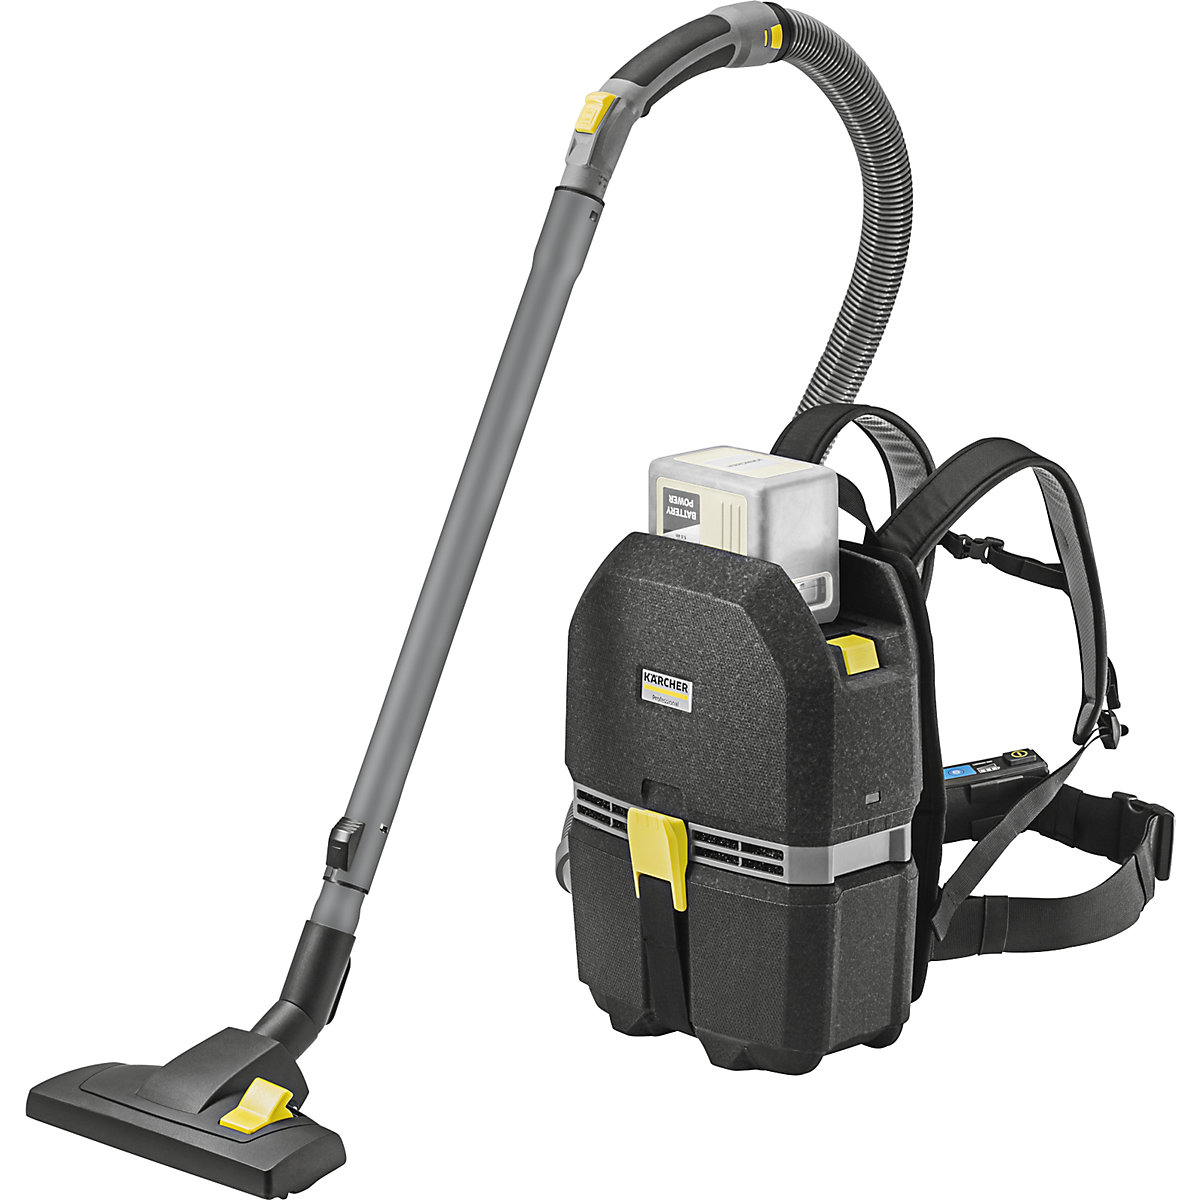 Rechargeable backpack vacuum cleaner - Kärcher